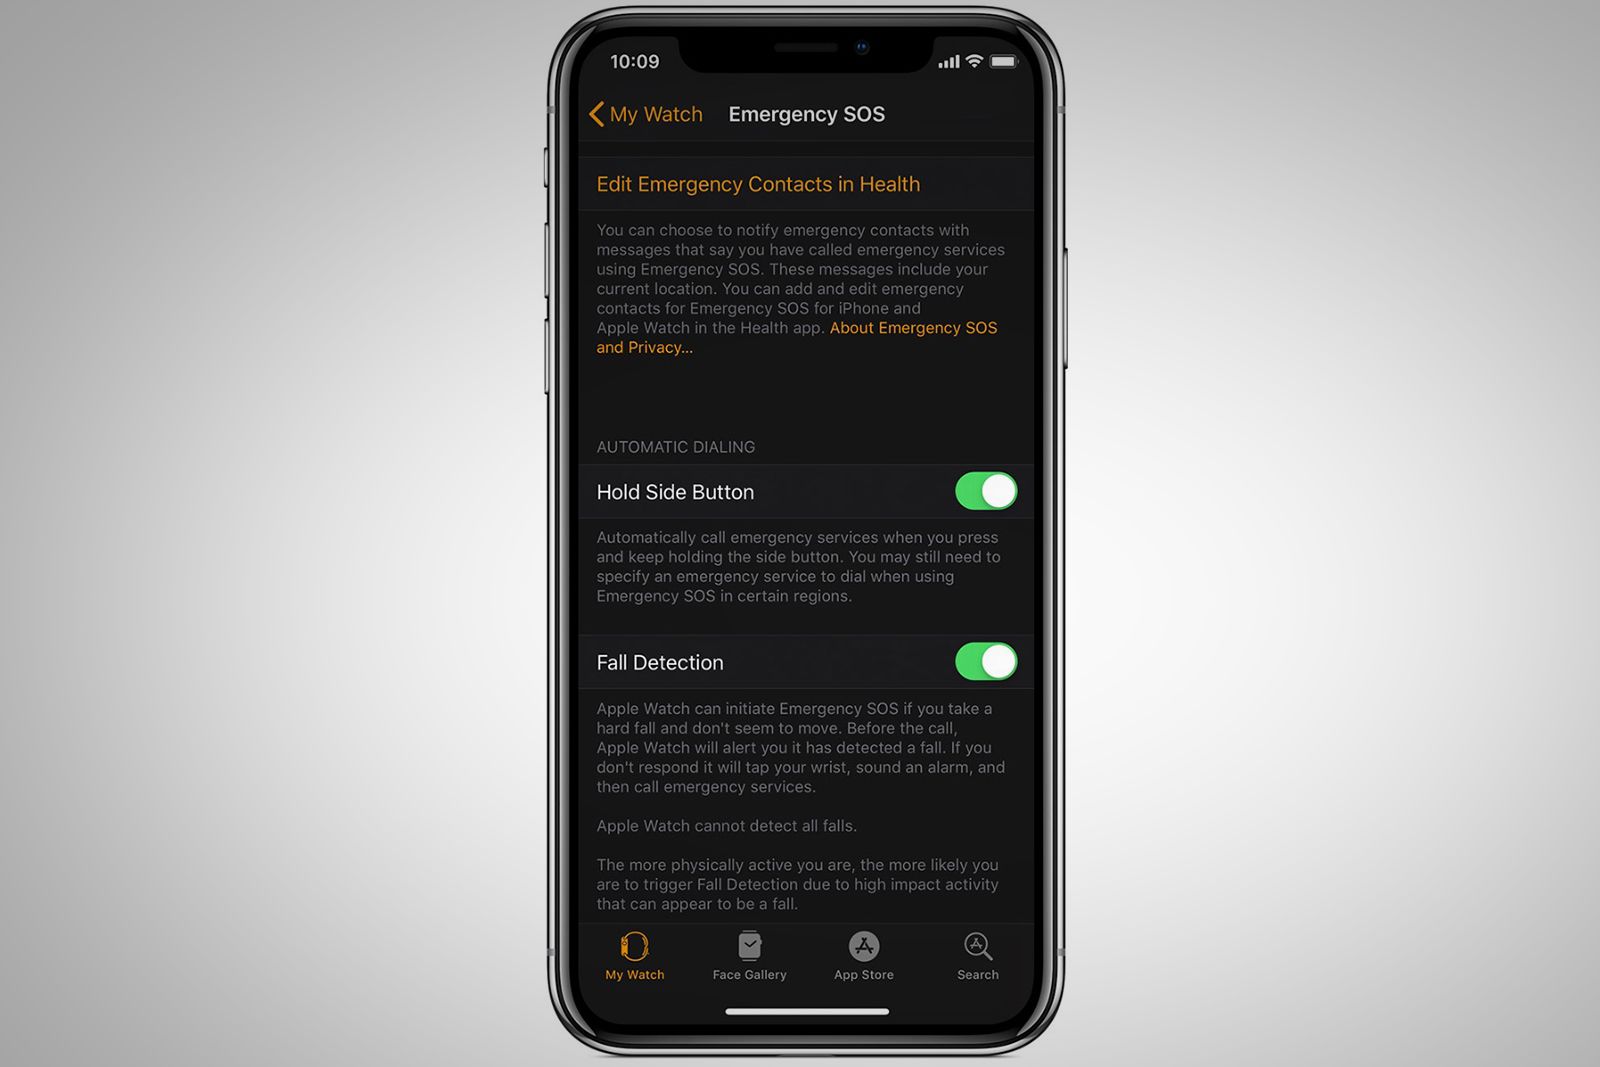 How To Turn On Fall Detection On Apple Watch Series 4 image 3